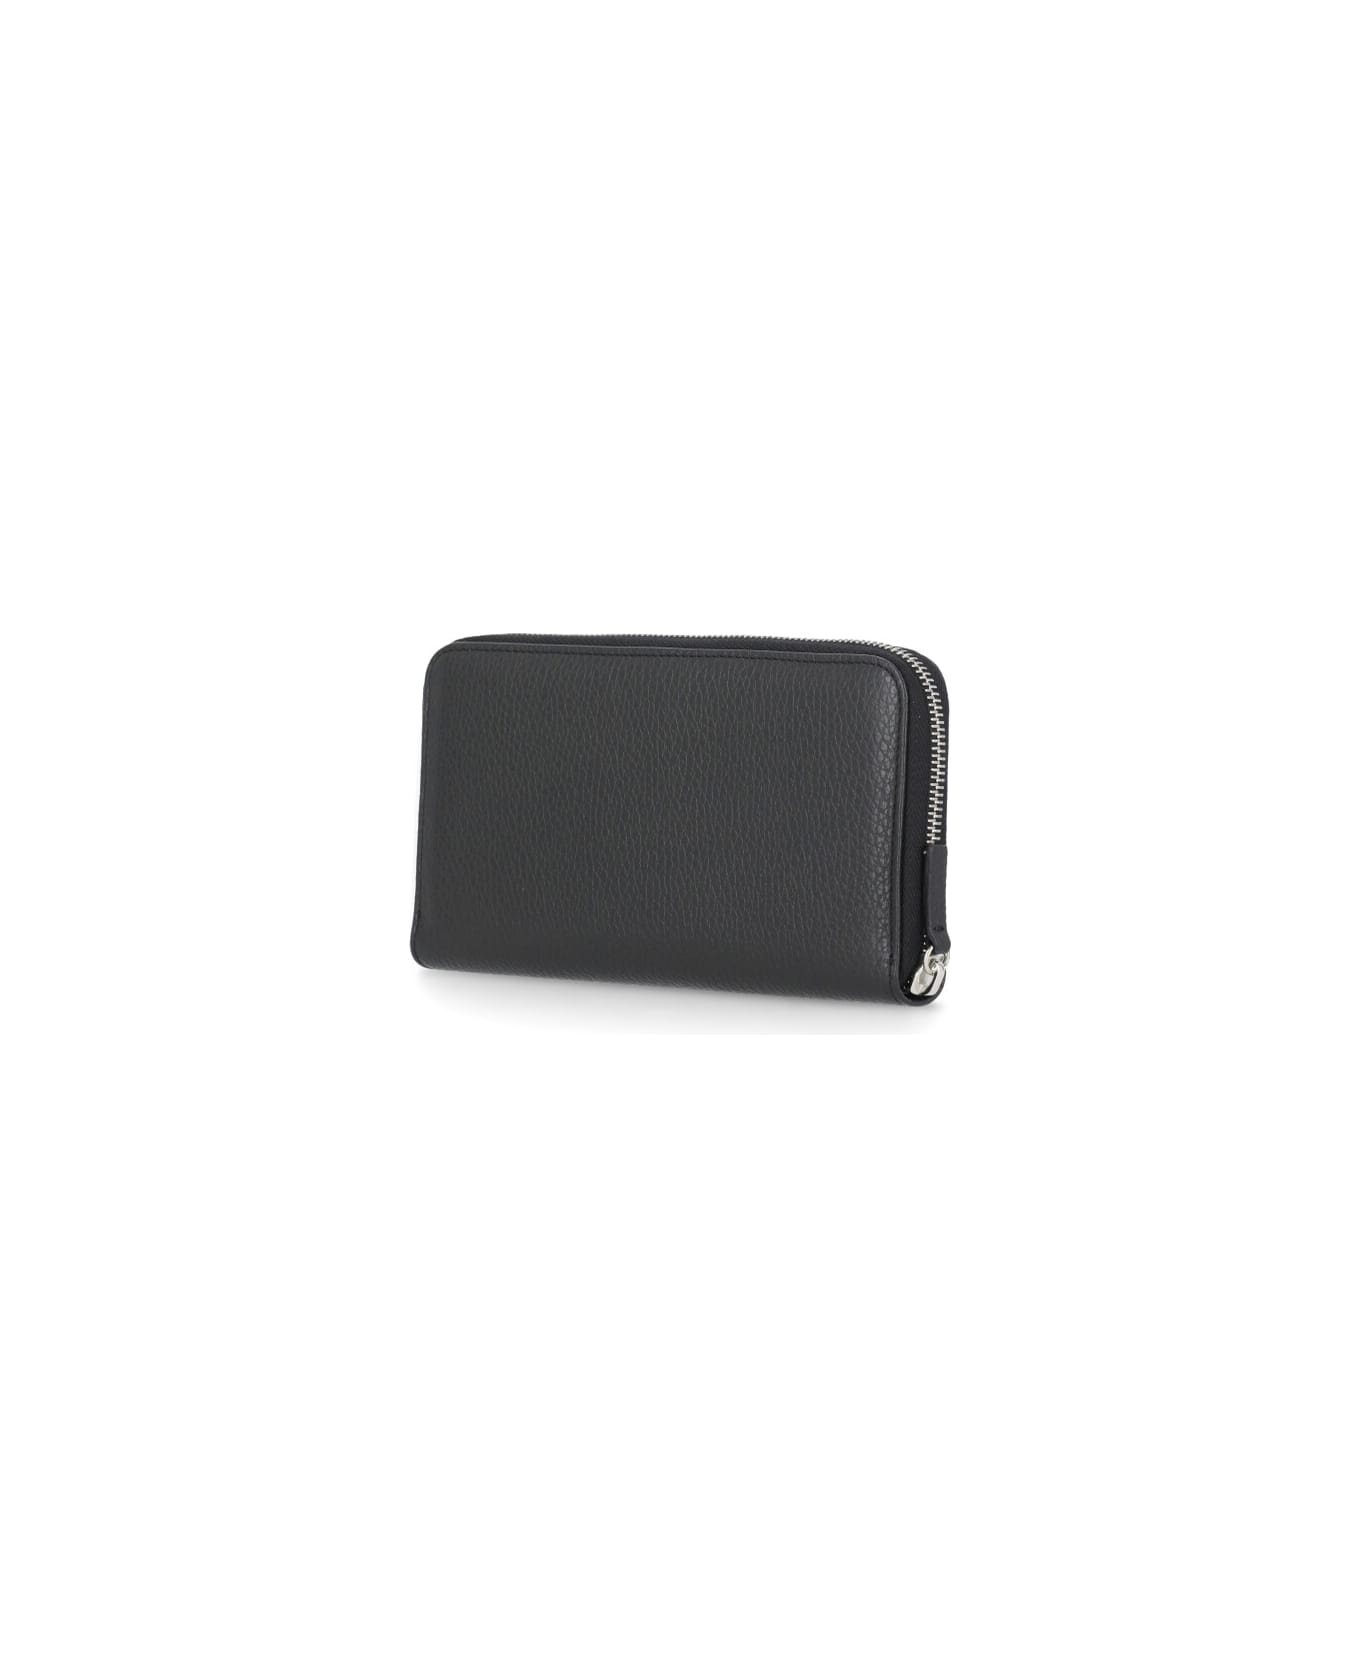 Orciani Micron Leather Wallet - Black 財布